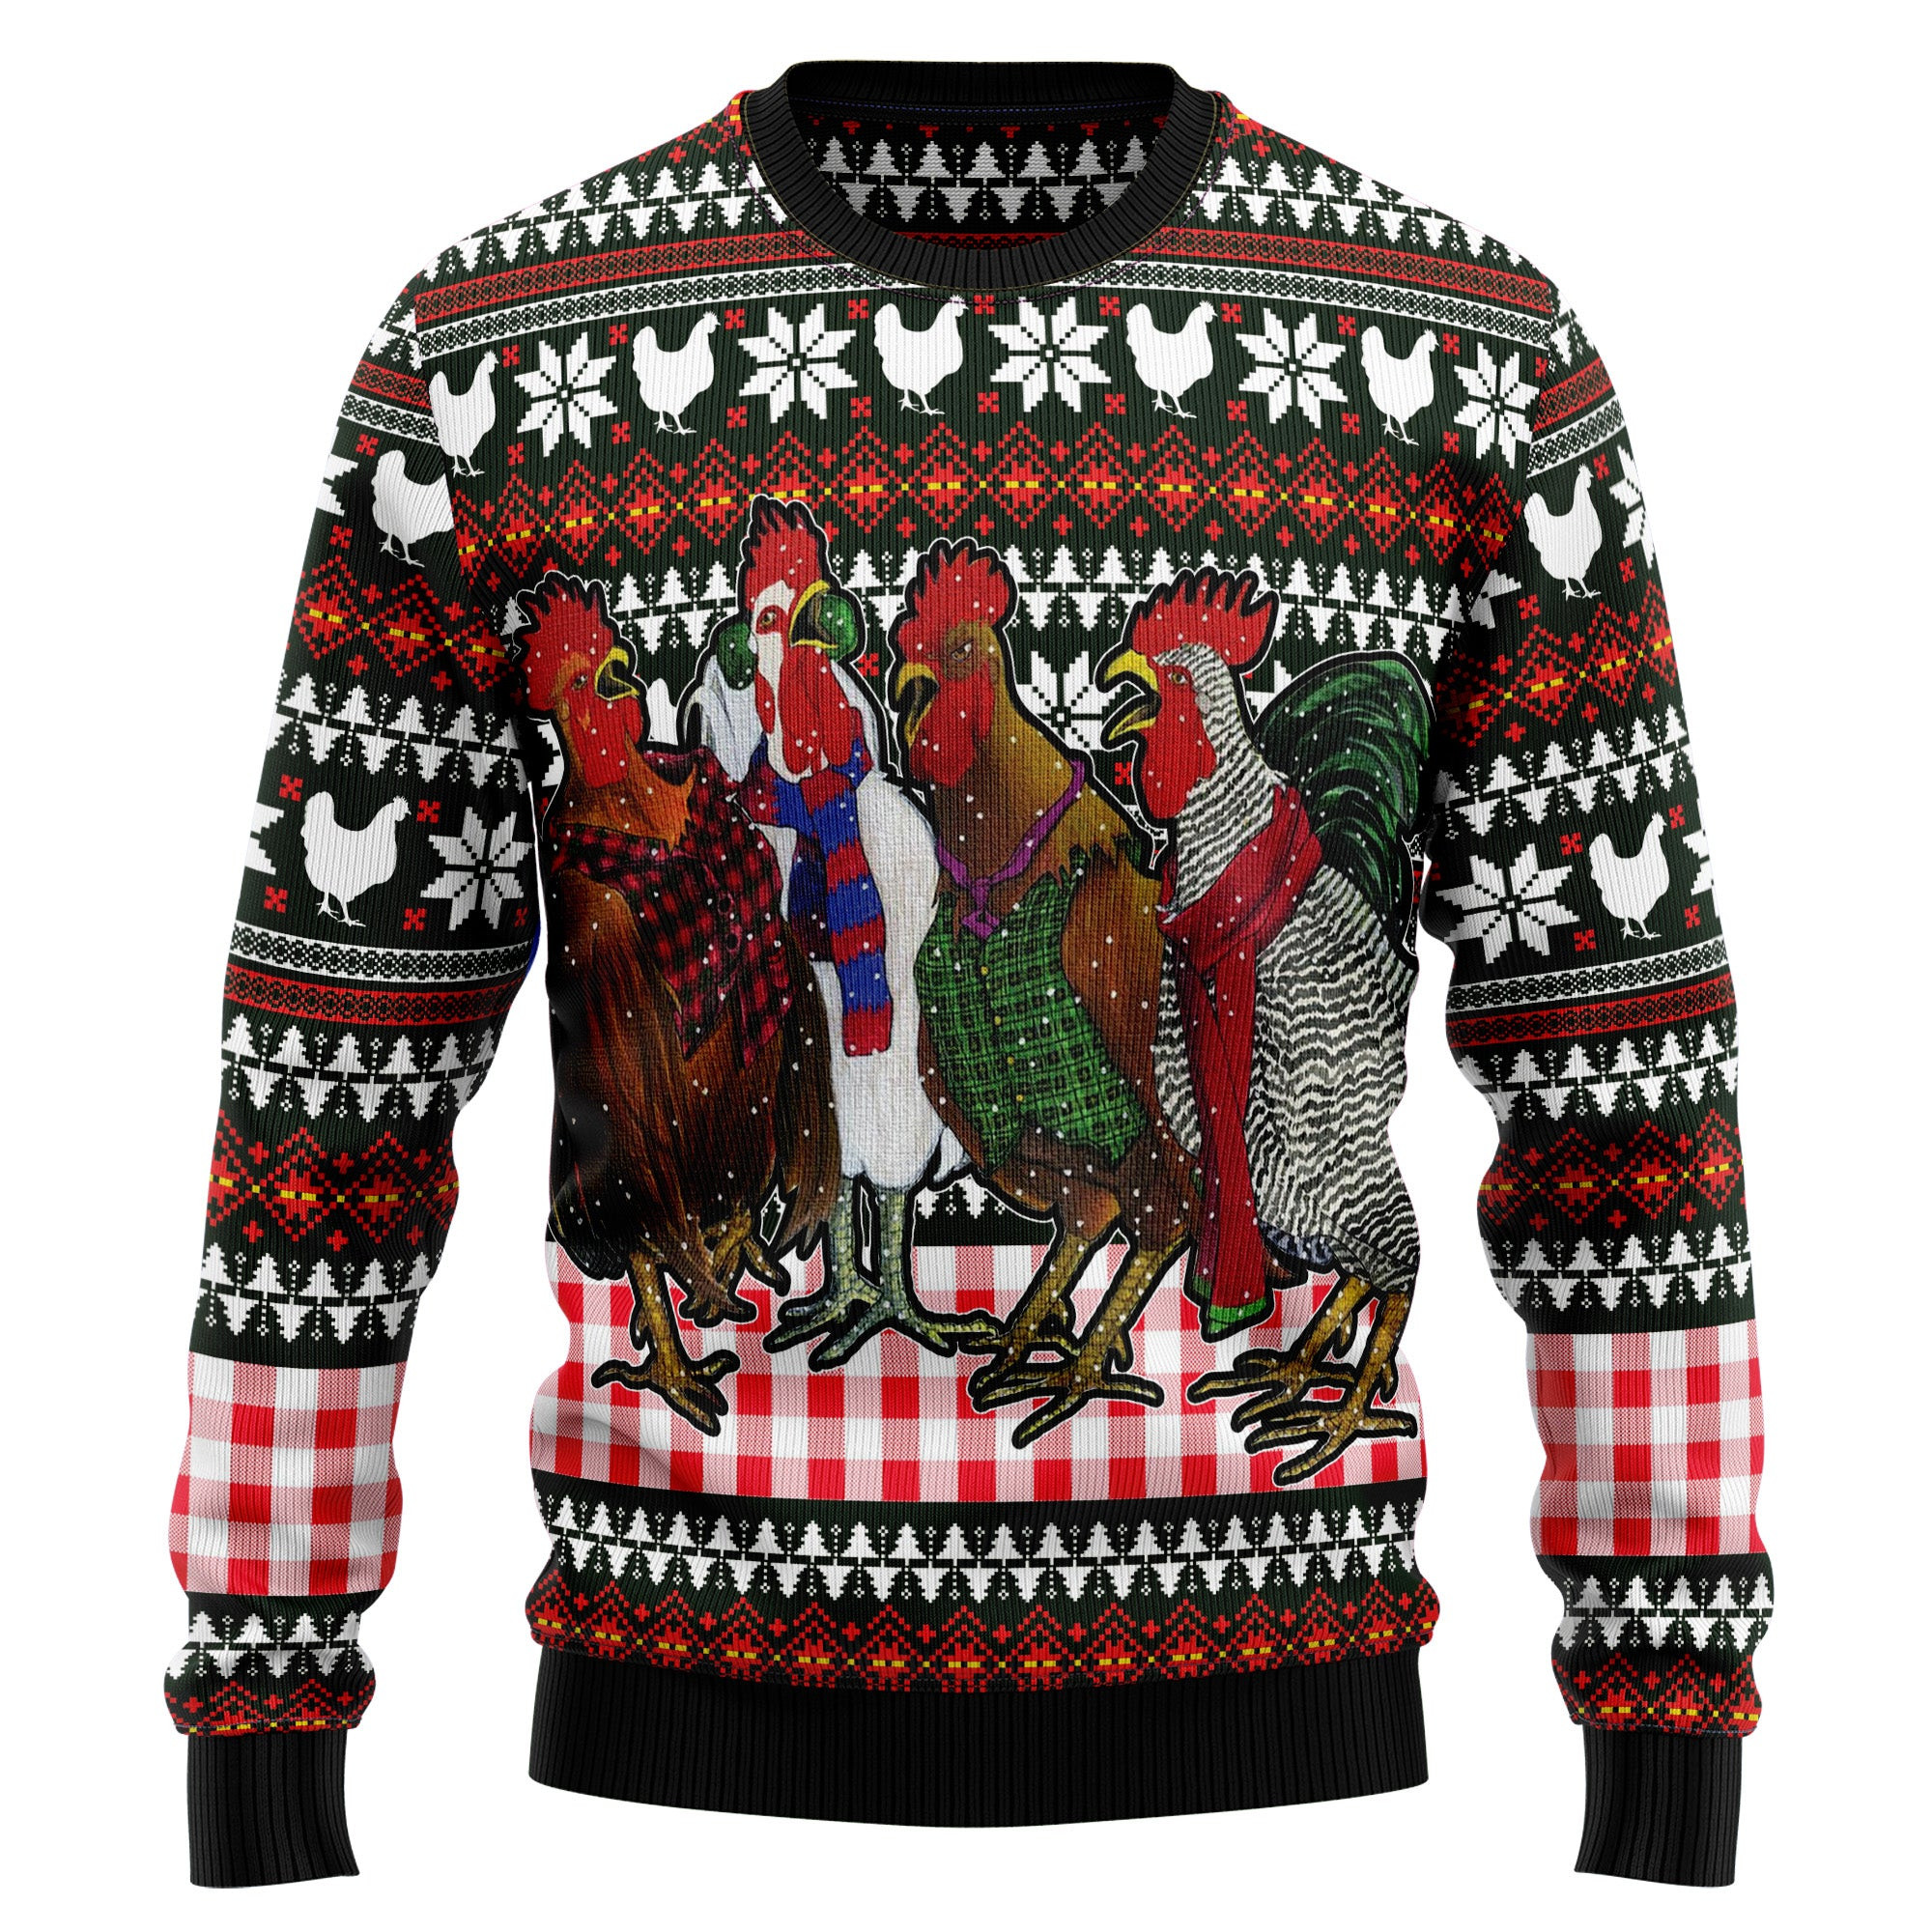 Chicken Under Snow Ugly Christmas Sweater, Ugly Sweater For Men Women, Holiday Sweater